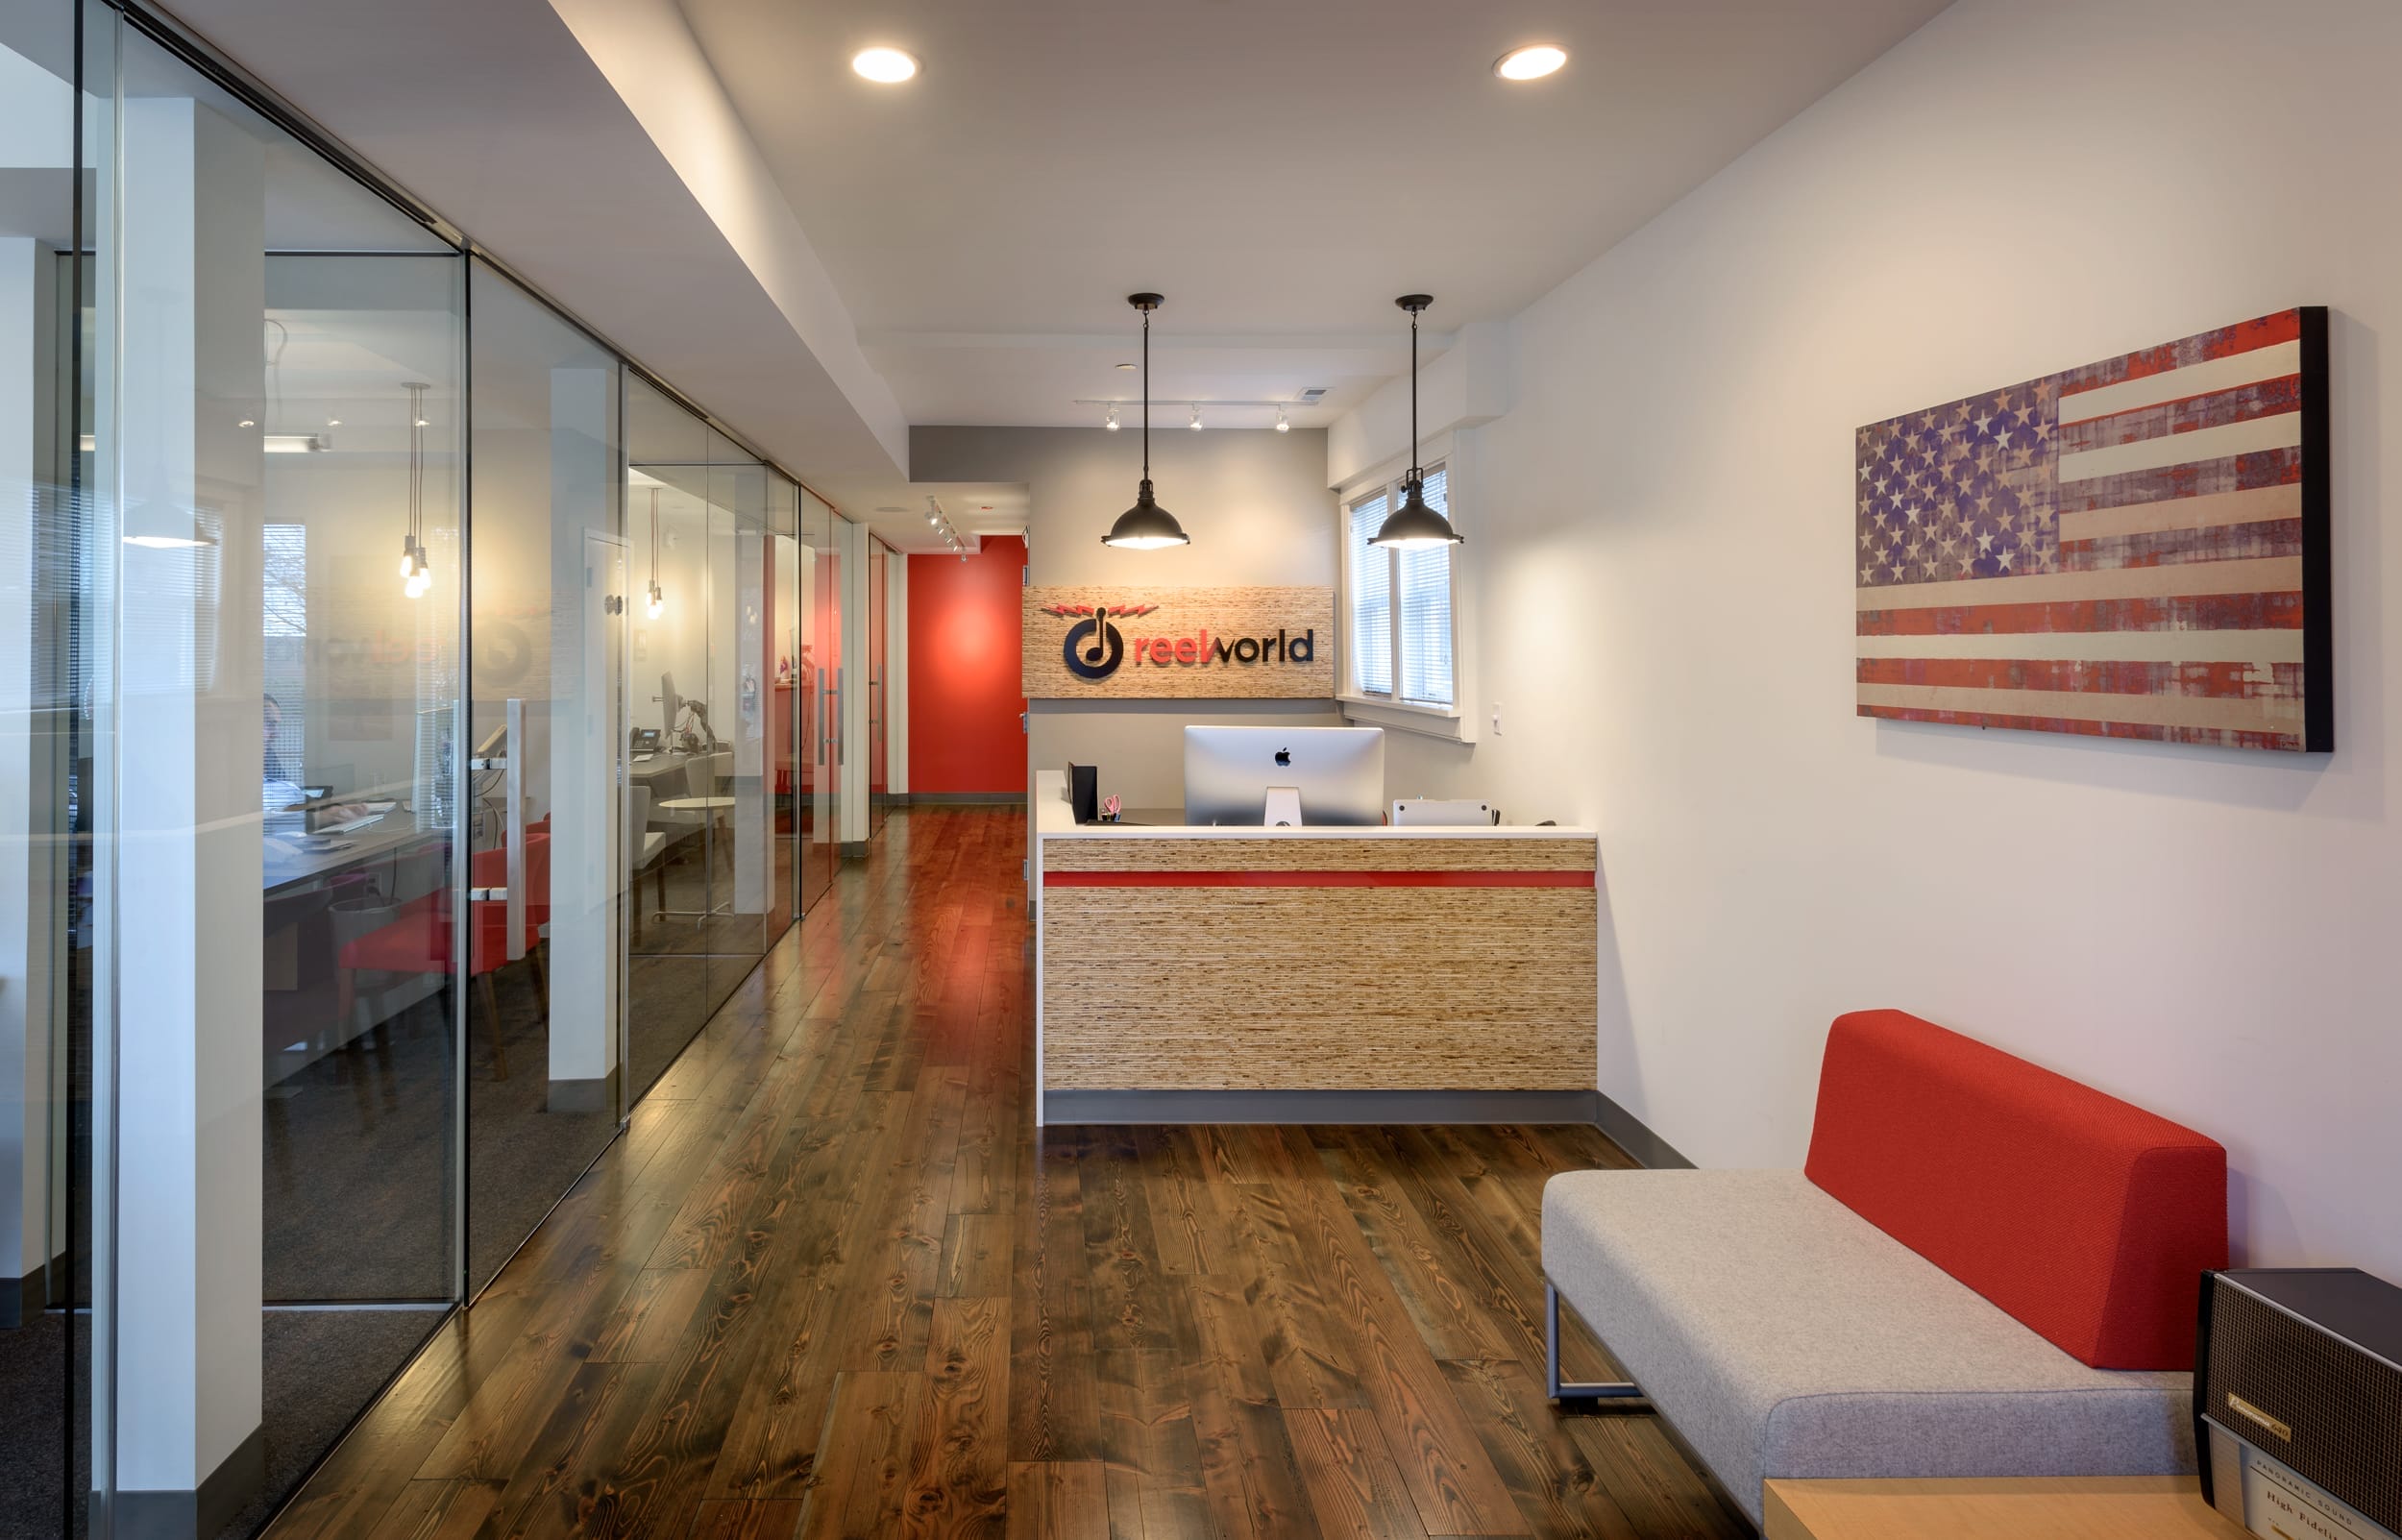 A reception area in a modern office with an American flag on the wall.